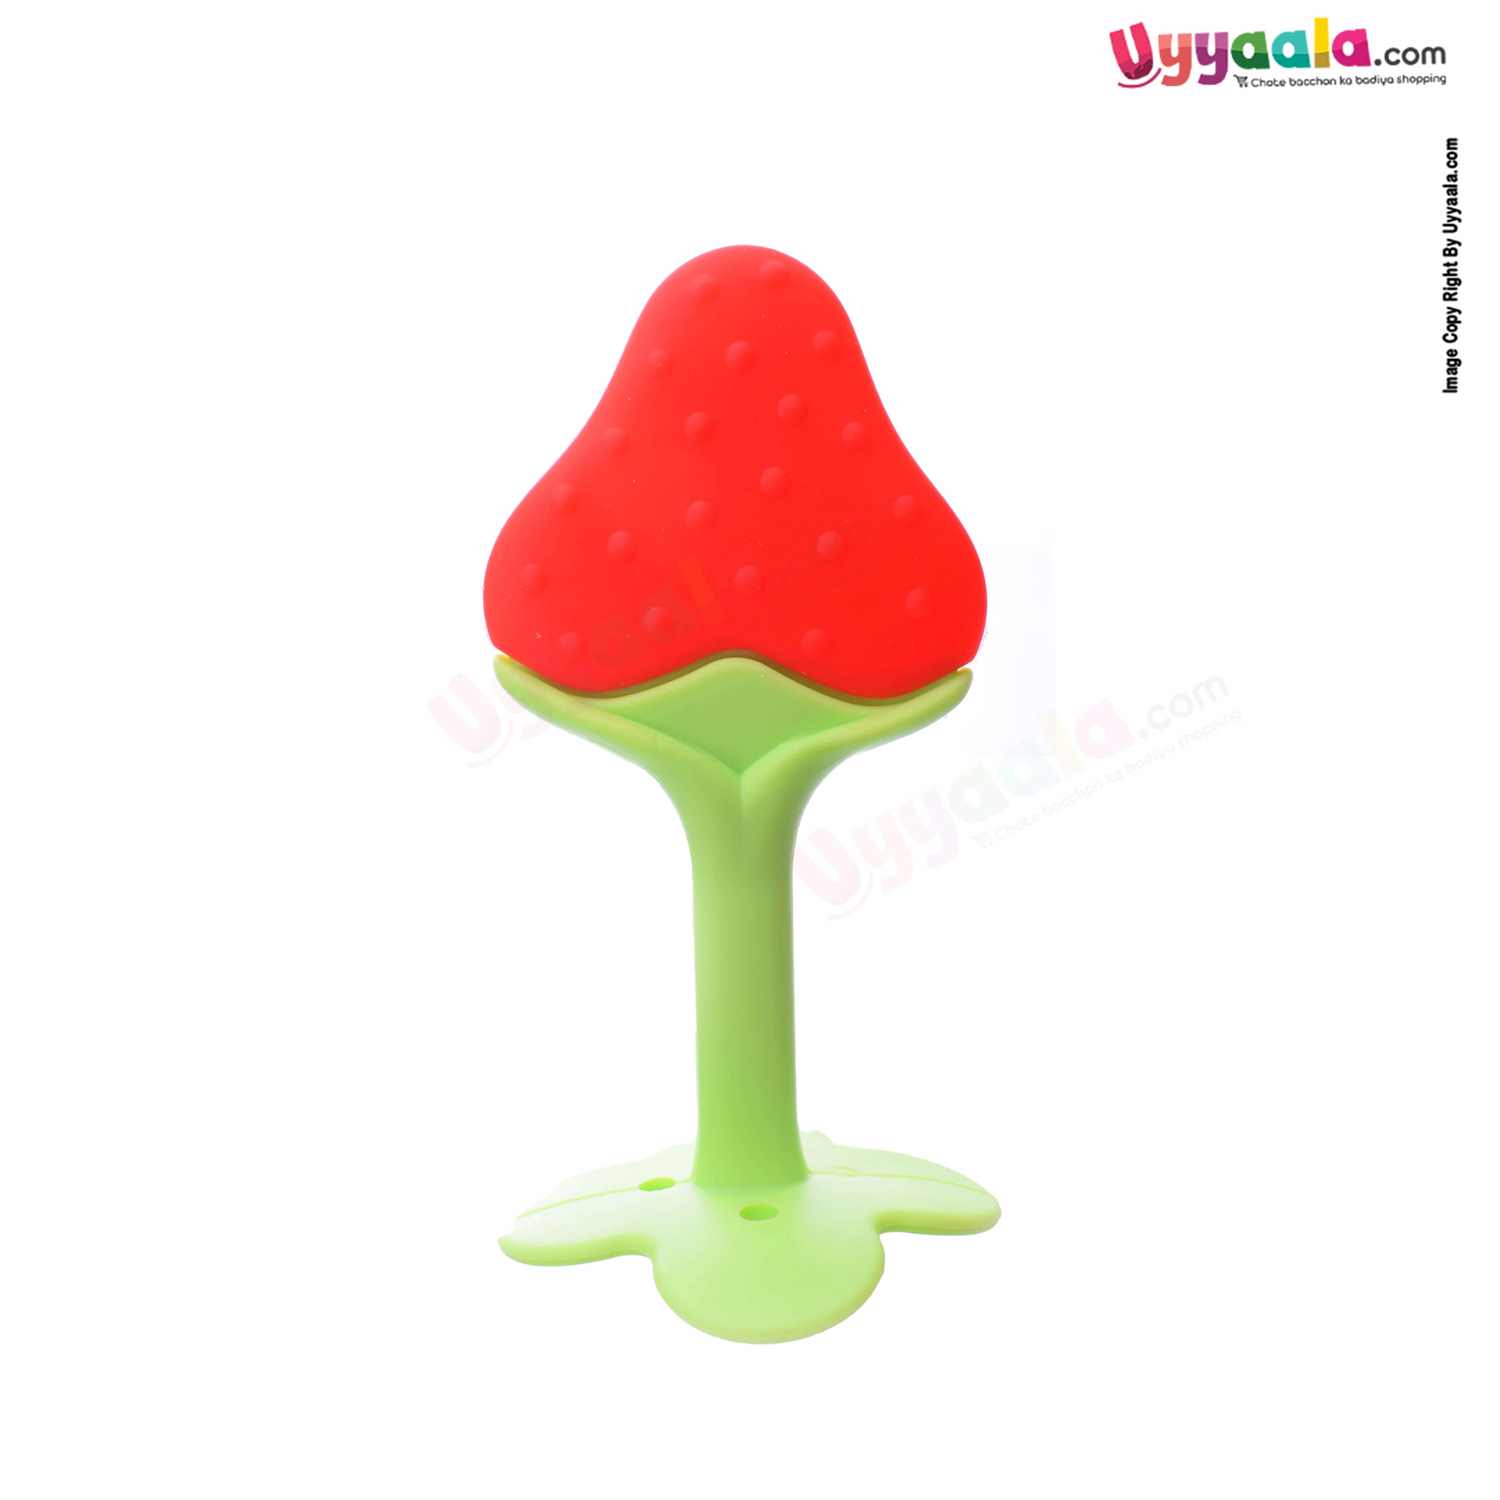 MEE MEE Silicone Textured Teether For Babies 4+m Age - Red, Green